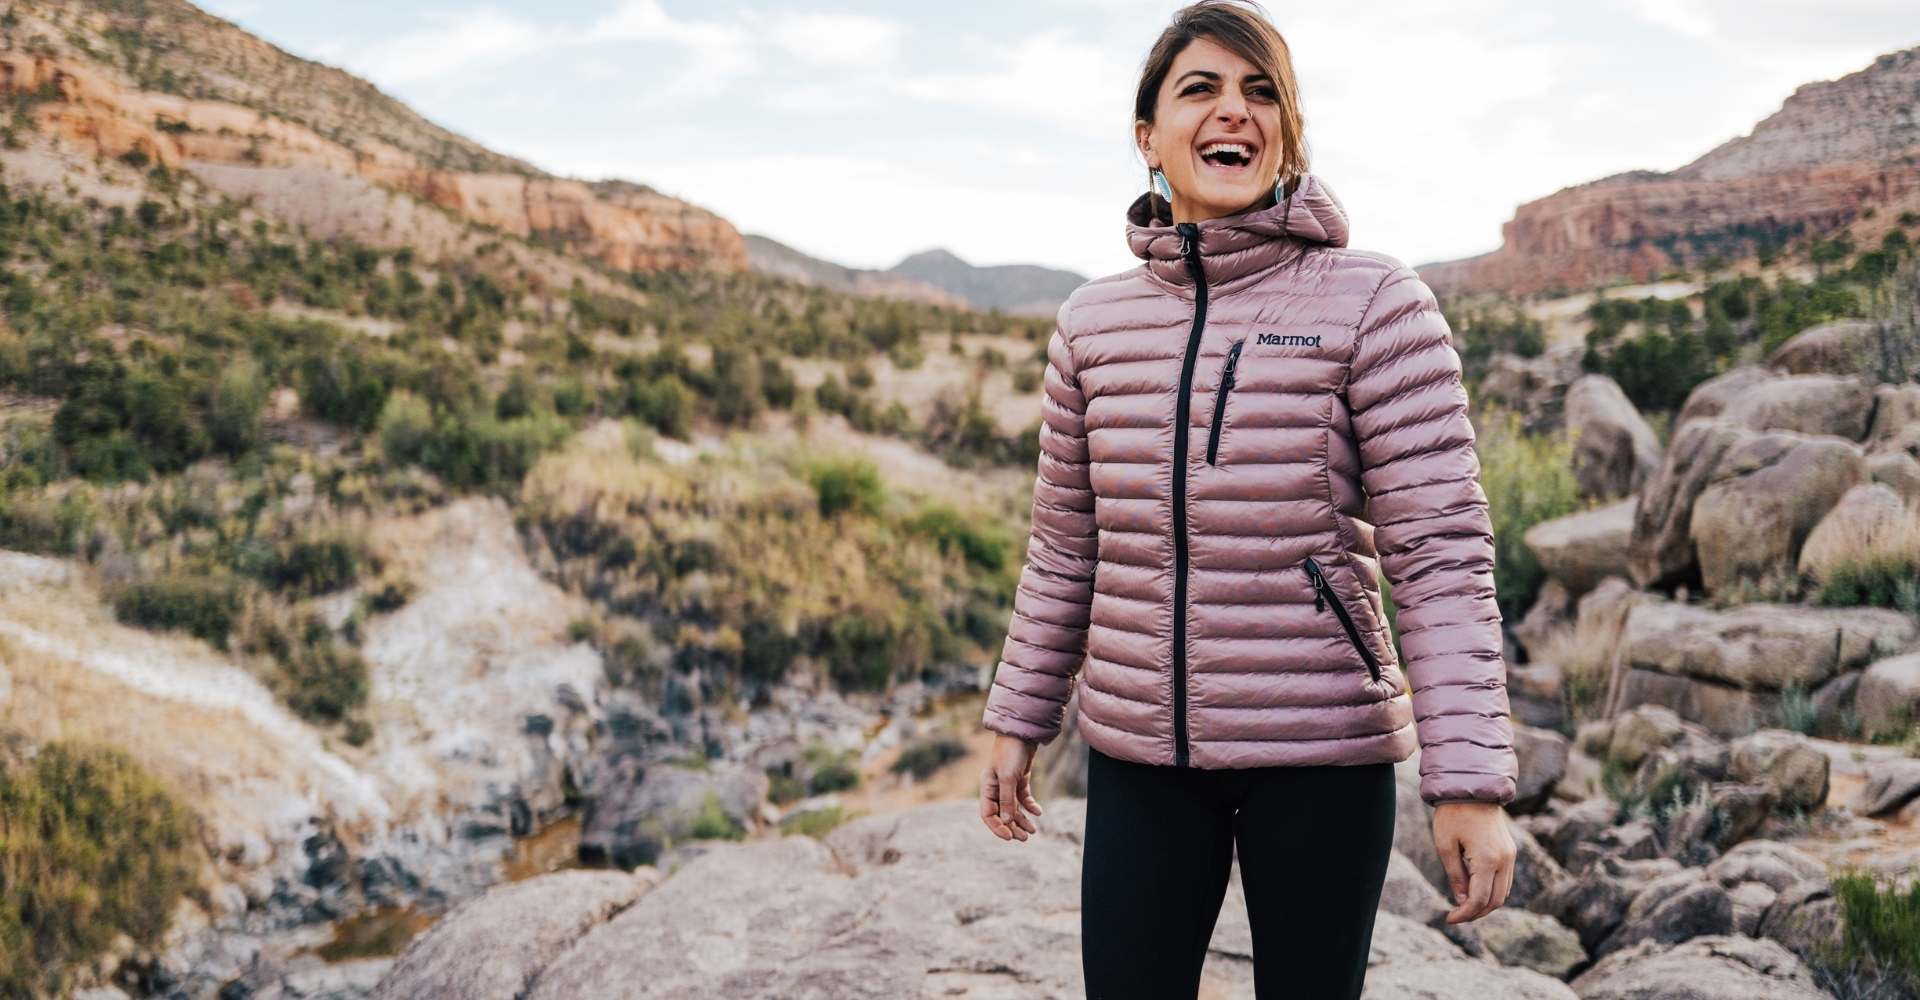 Top Performance in Premium Insulated Jackets for Women